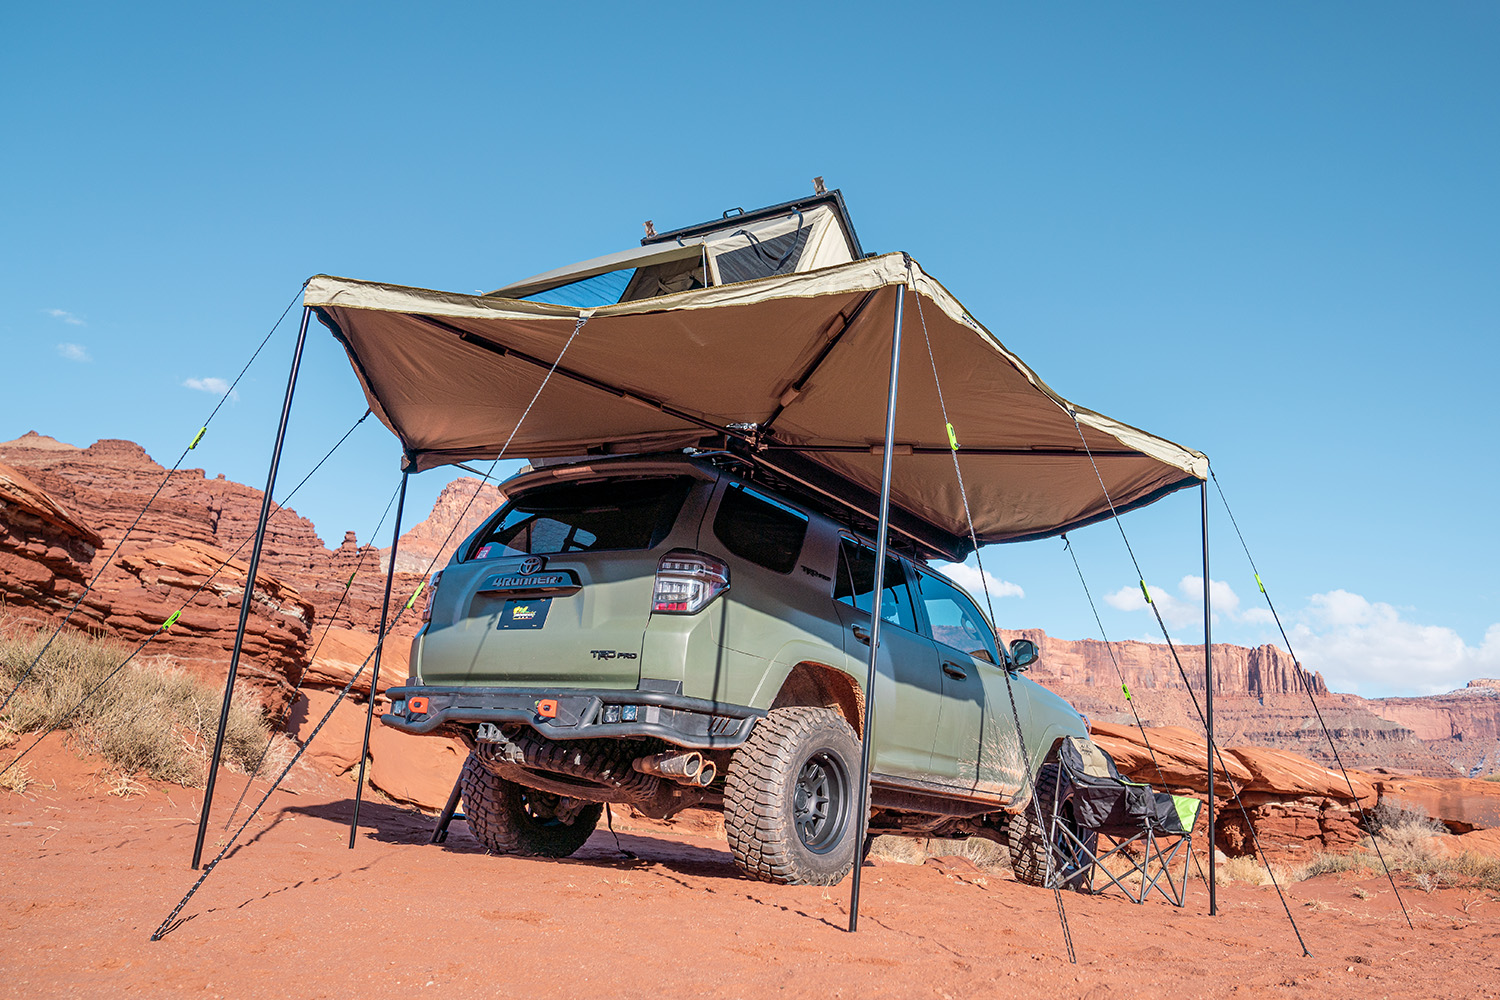 In a 4Runner, can the hatch be safely opened with the awning deployed?